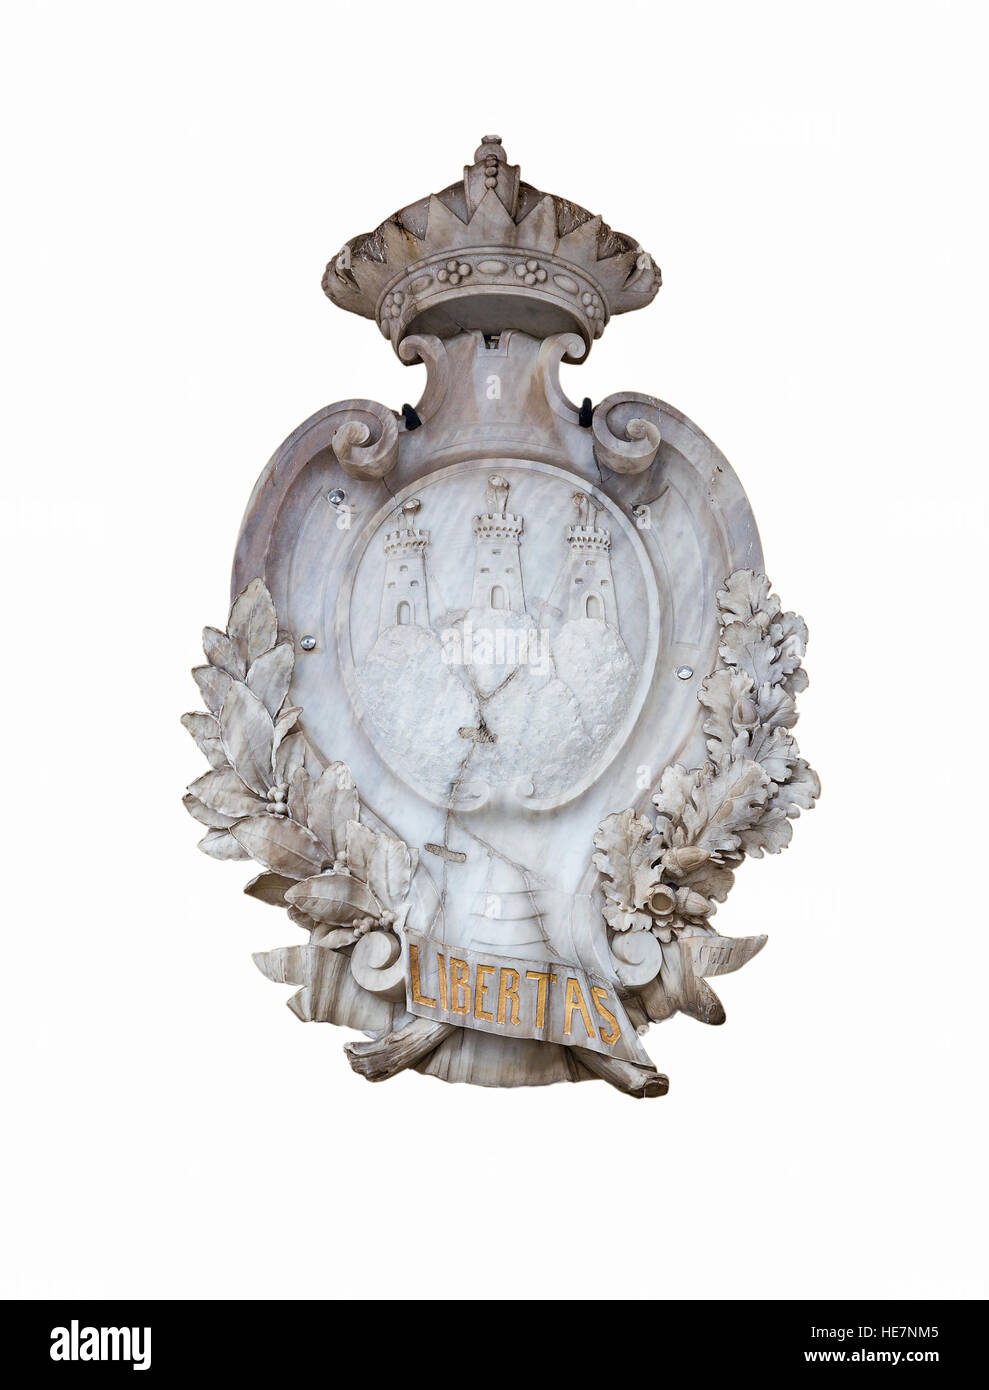 San Marino stone Coat of Arms closeup isolated on white background. From the wall of Basilica di San Marino, built in neoclassical style. Stock Photo